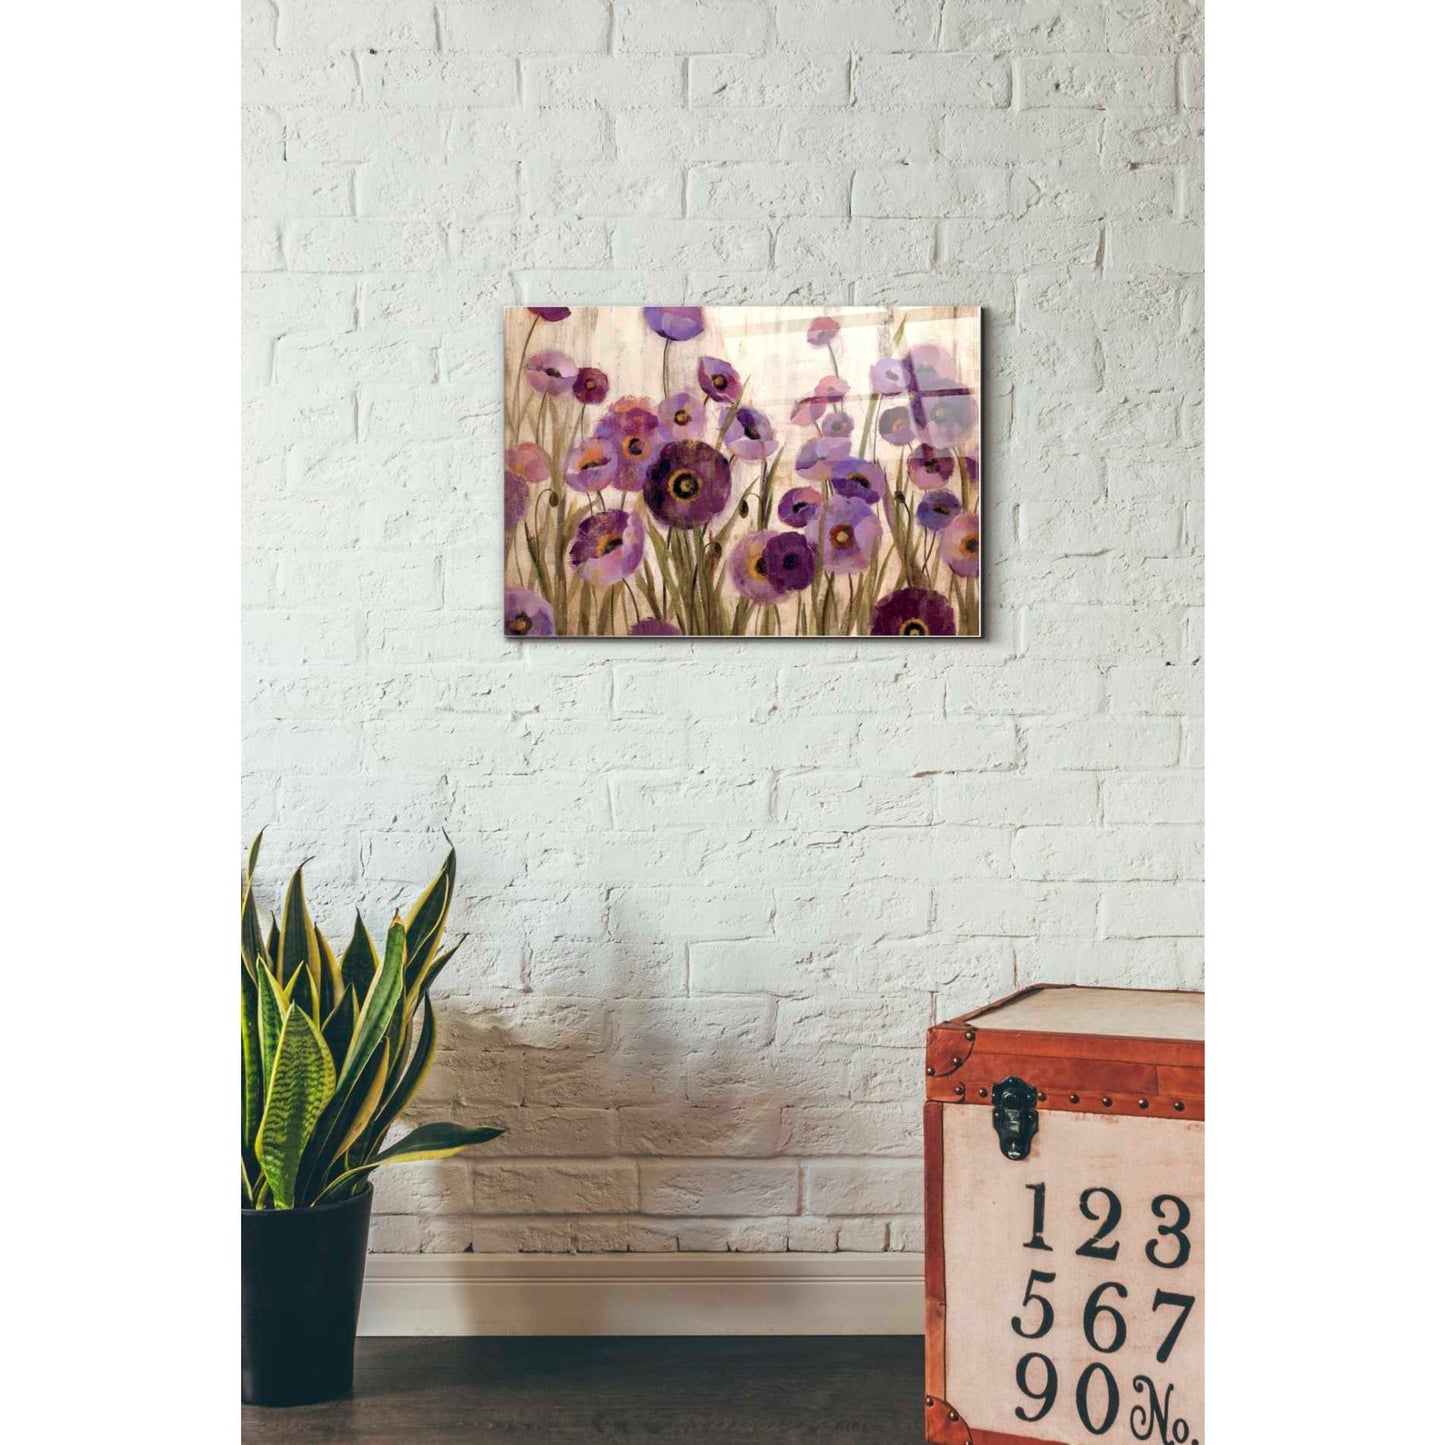 Epic Art 'Pink And Purple Flowers' by Silvia Vassileva, Acrylic Glass Wall Art,16x24